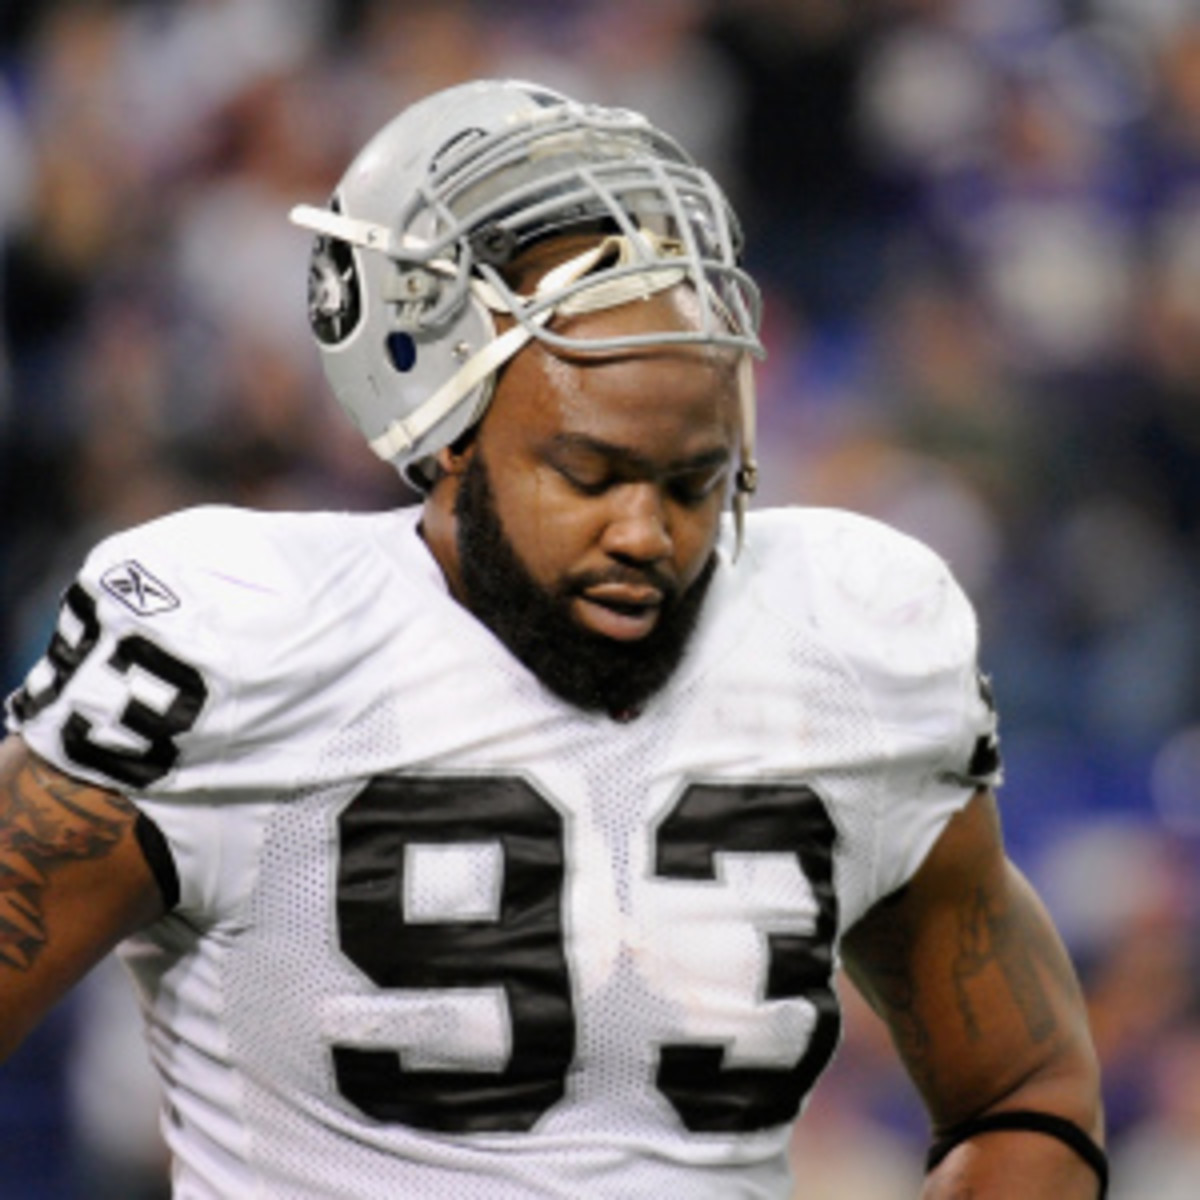 The Raiders are expected to release Tommy Kelly. (Hannah Foslien/Getty Images)